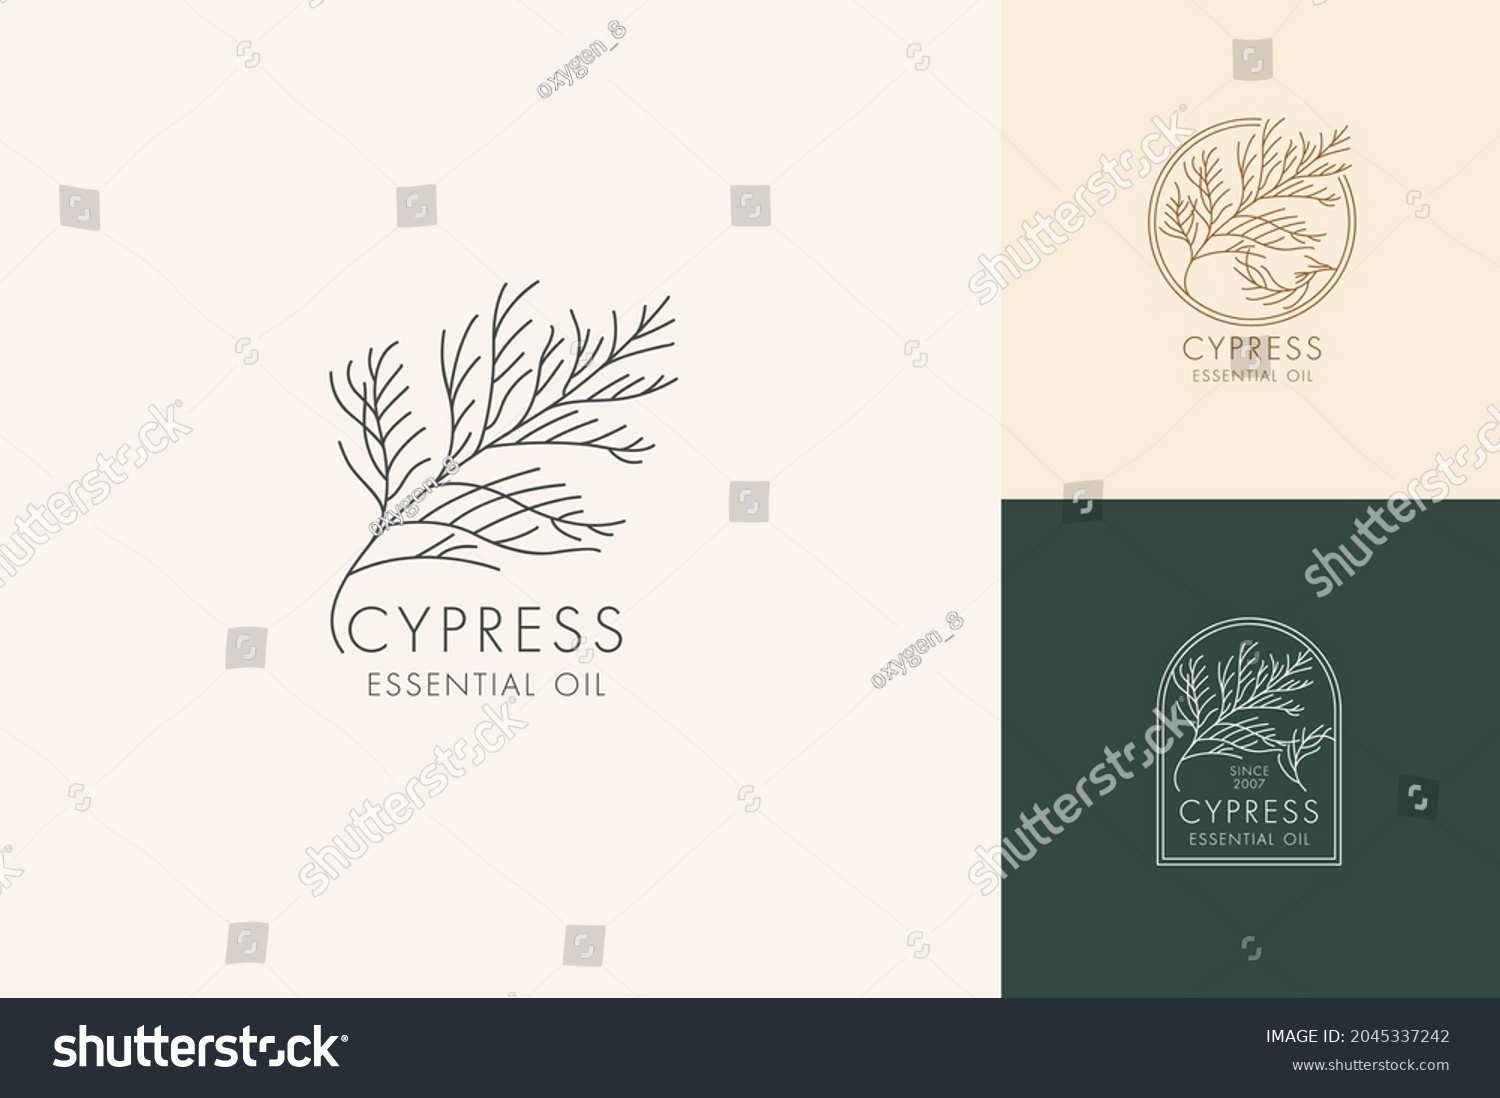 SVG of Vector linear set of botanical icons and symbols - cypress. Design logos for essential oil cypress. Natural cosmetic product svg